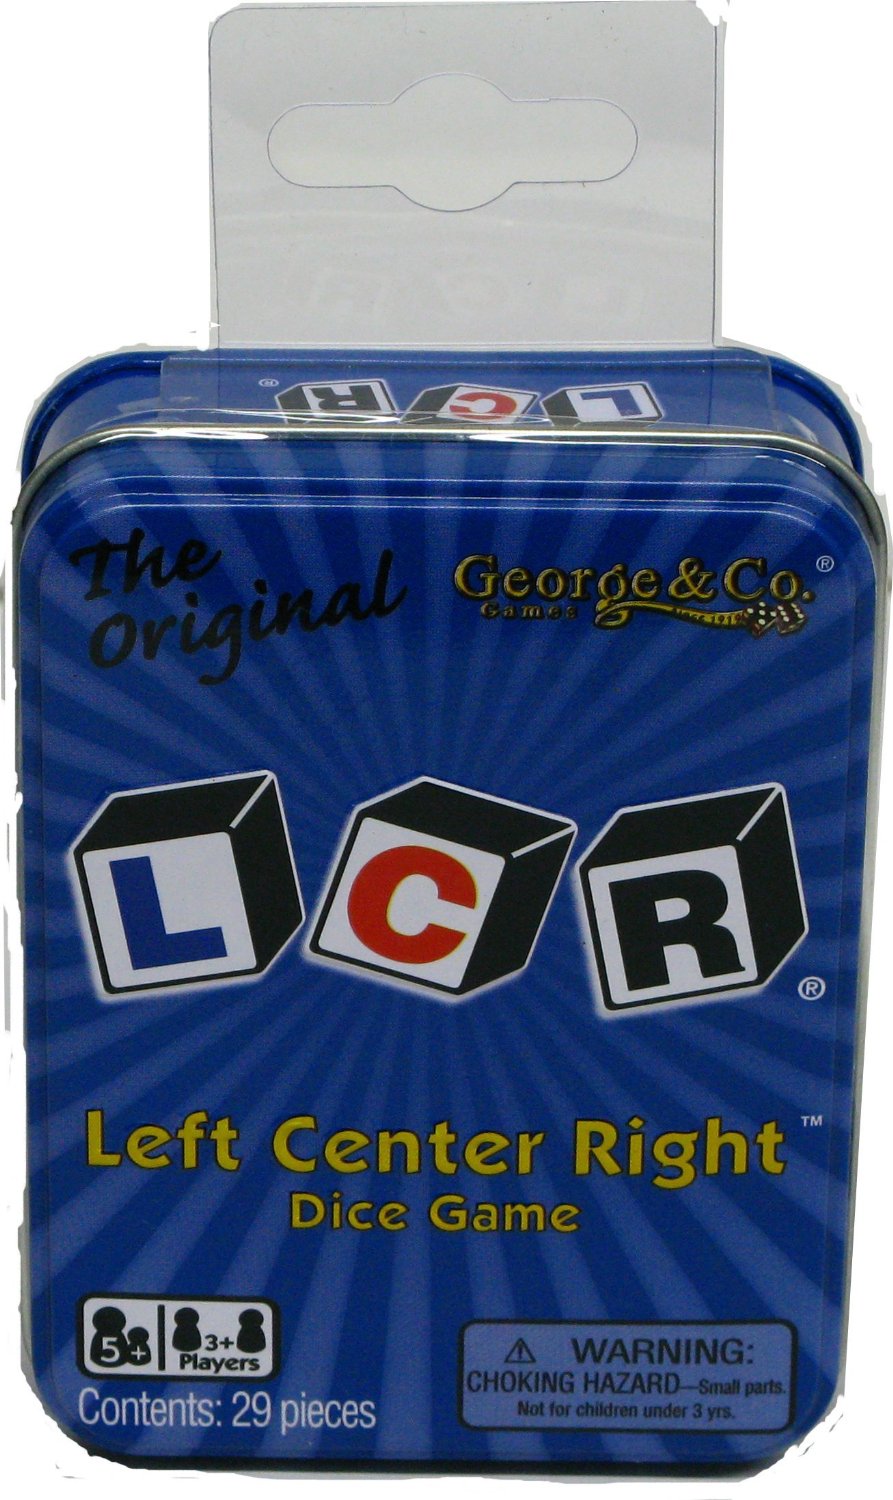 LCR Dice Game can be a Fun Party Game